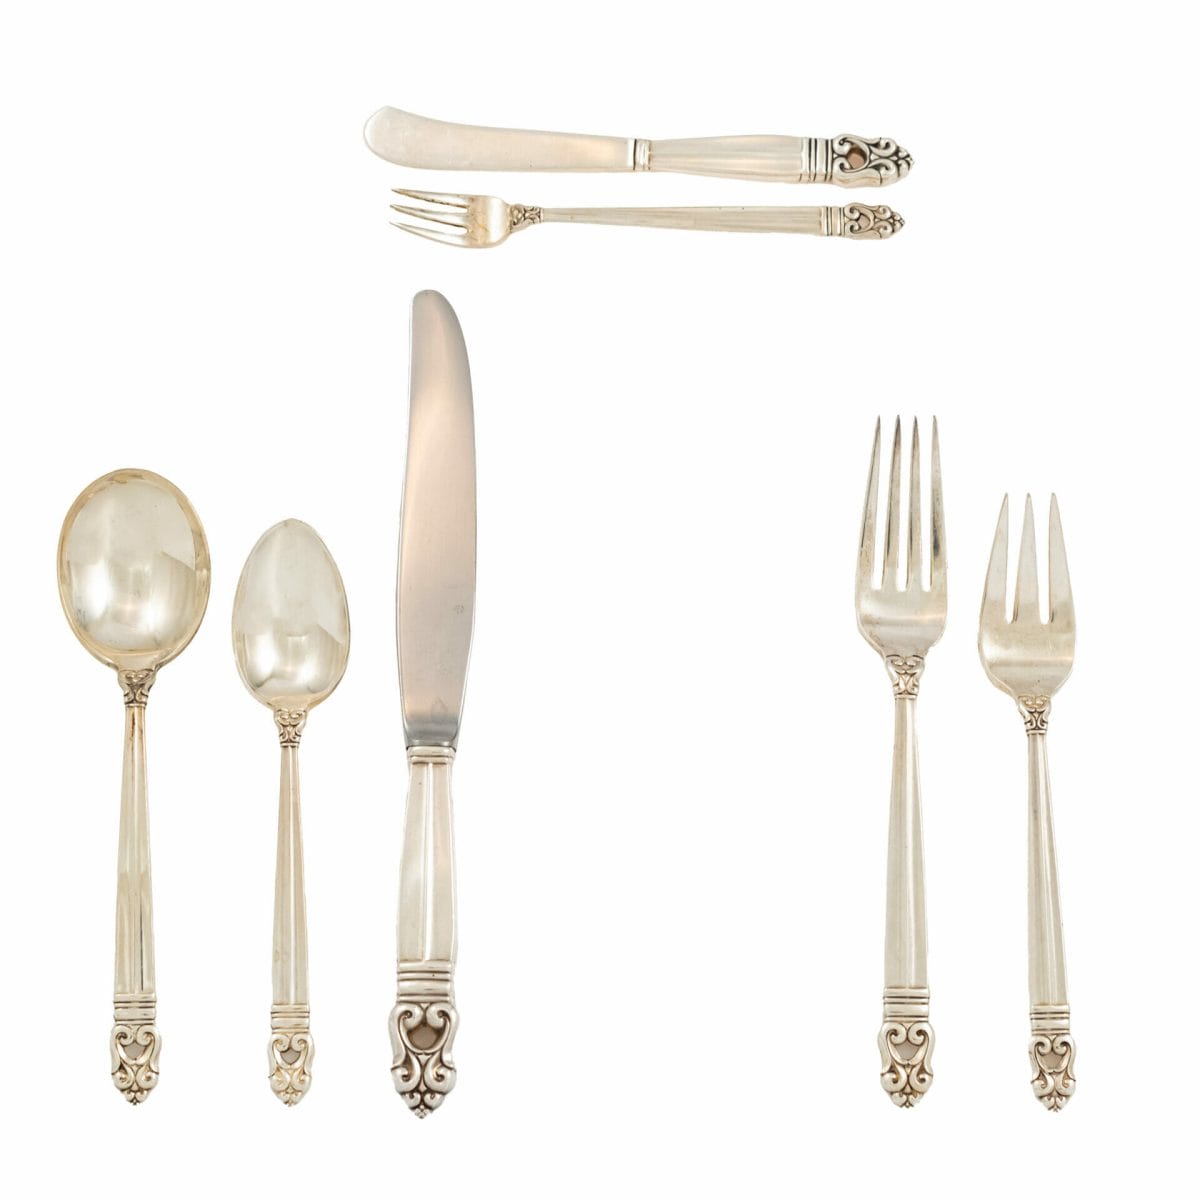 sterling flatware for auction in San Rafael California